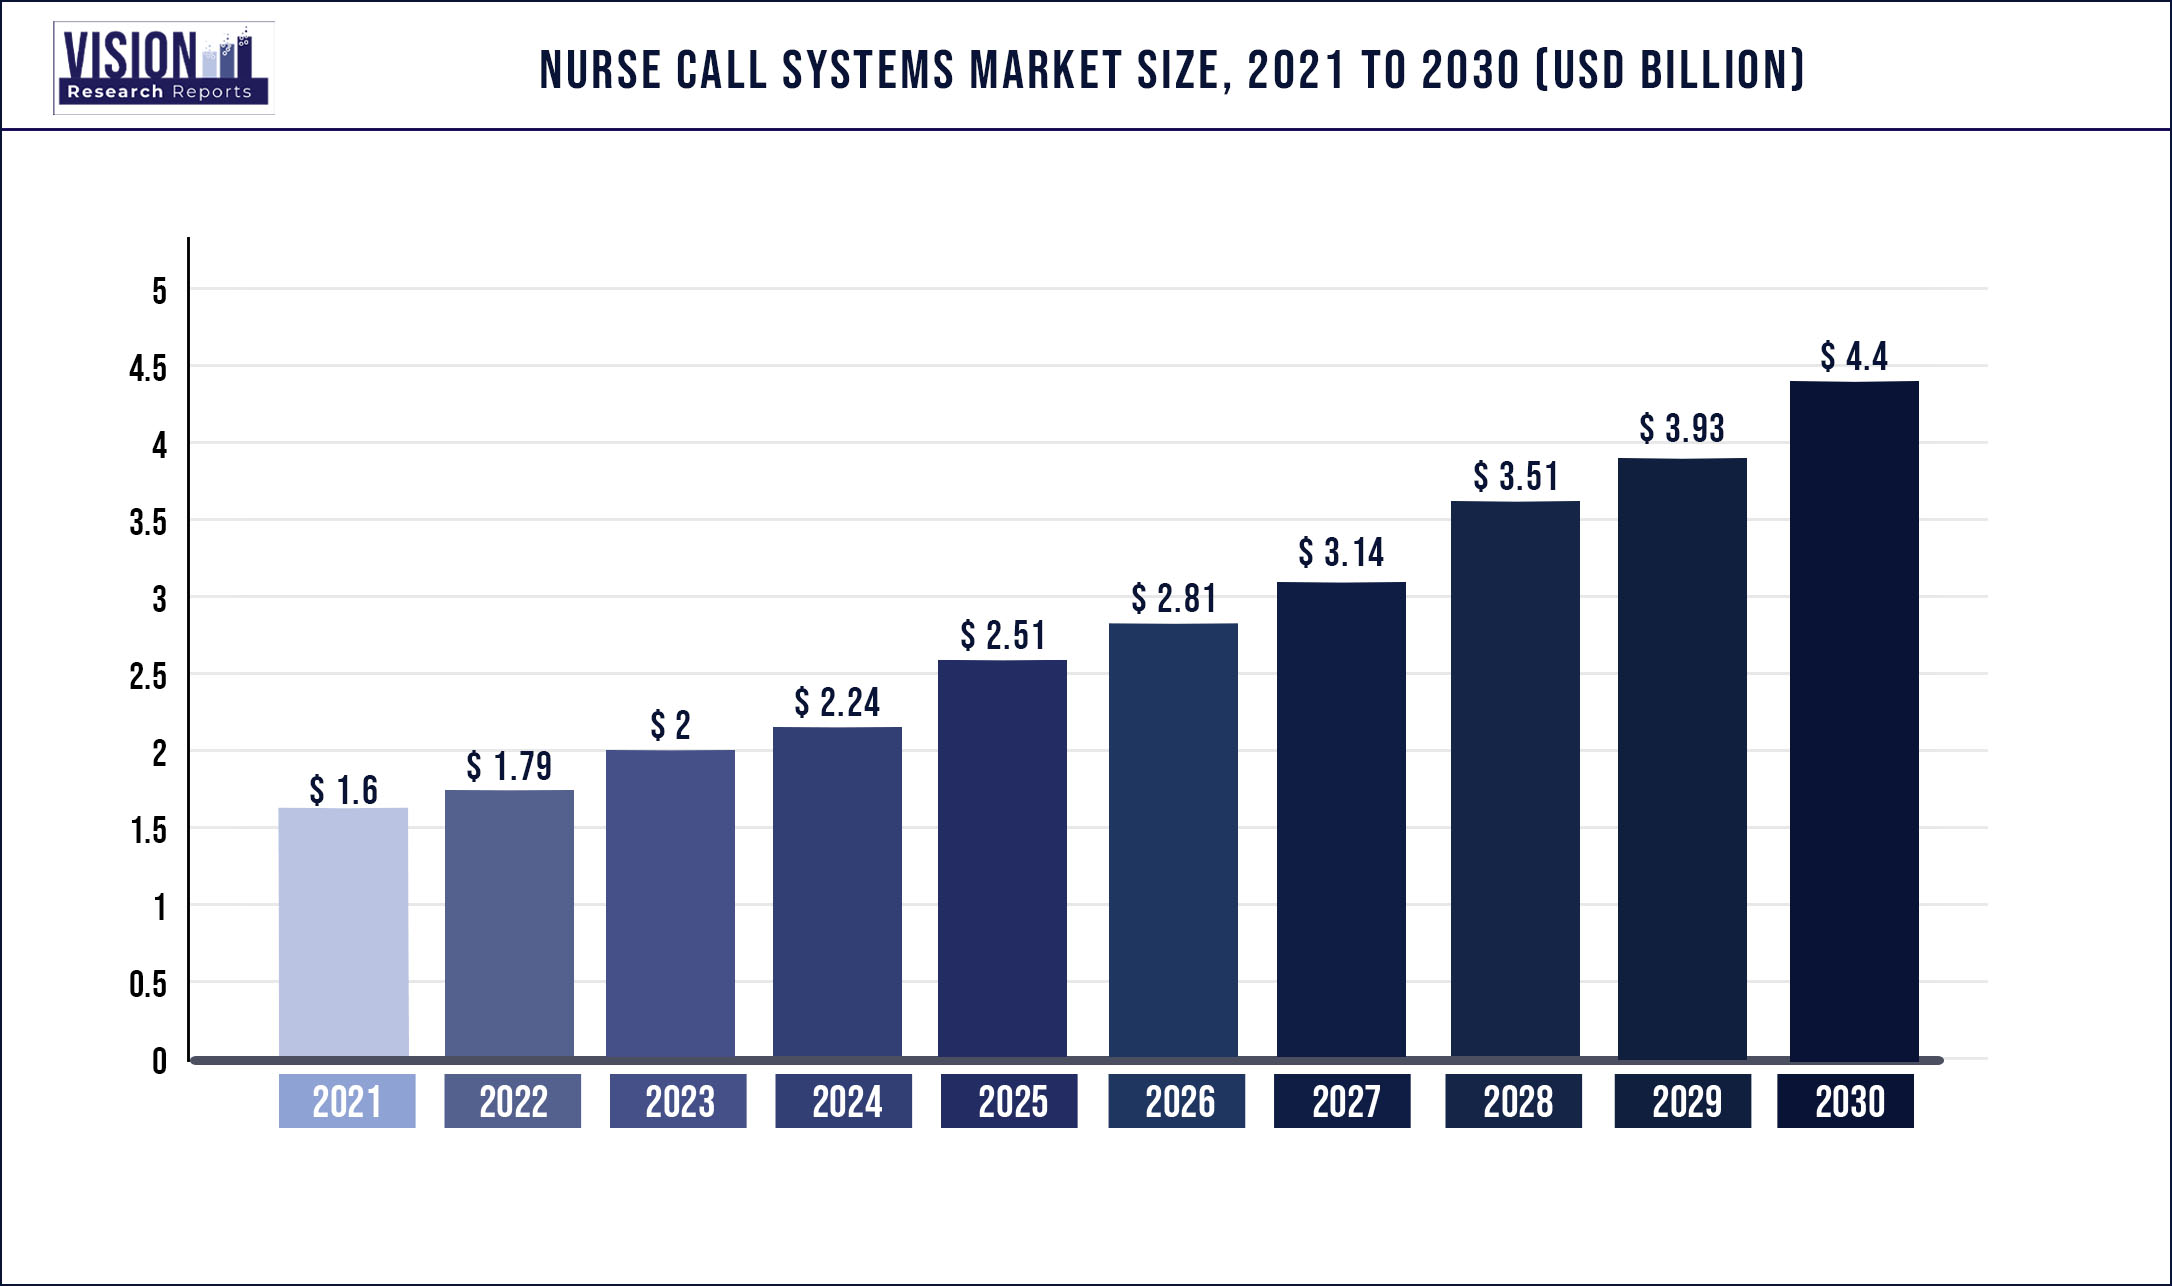 Nurse Call Systems Market Size 2021 to 2030